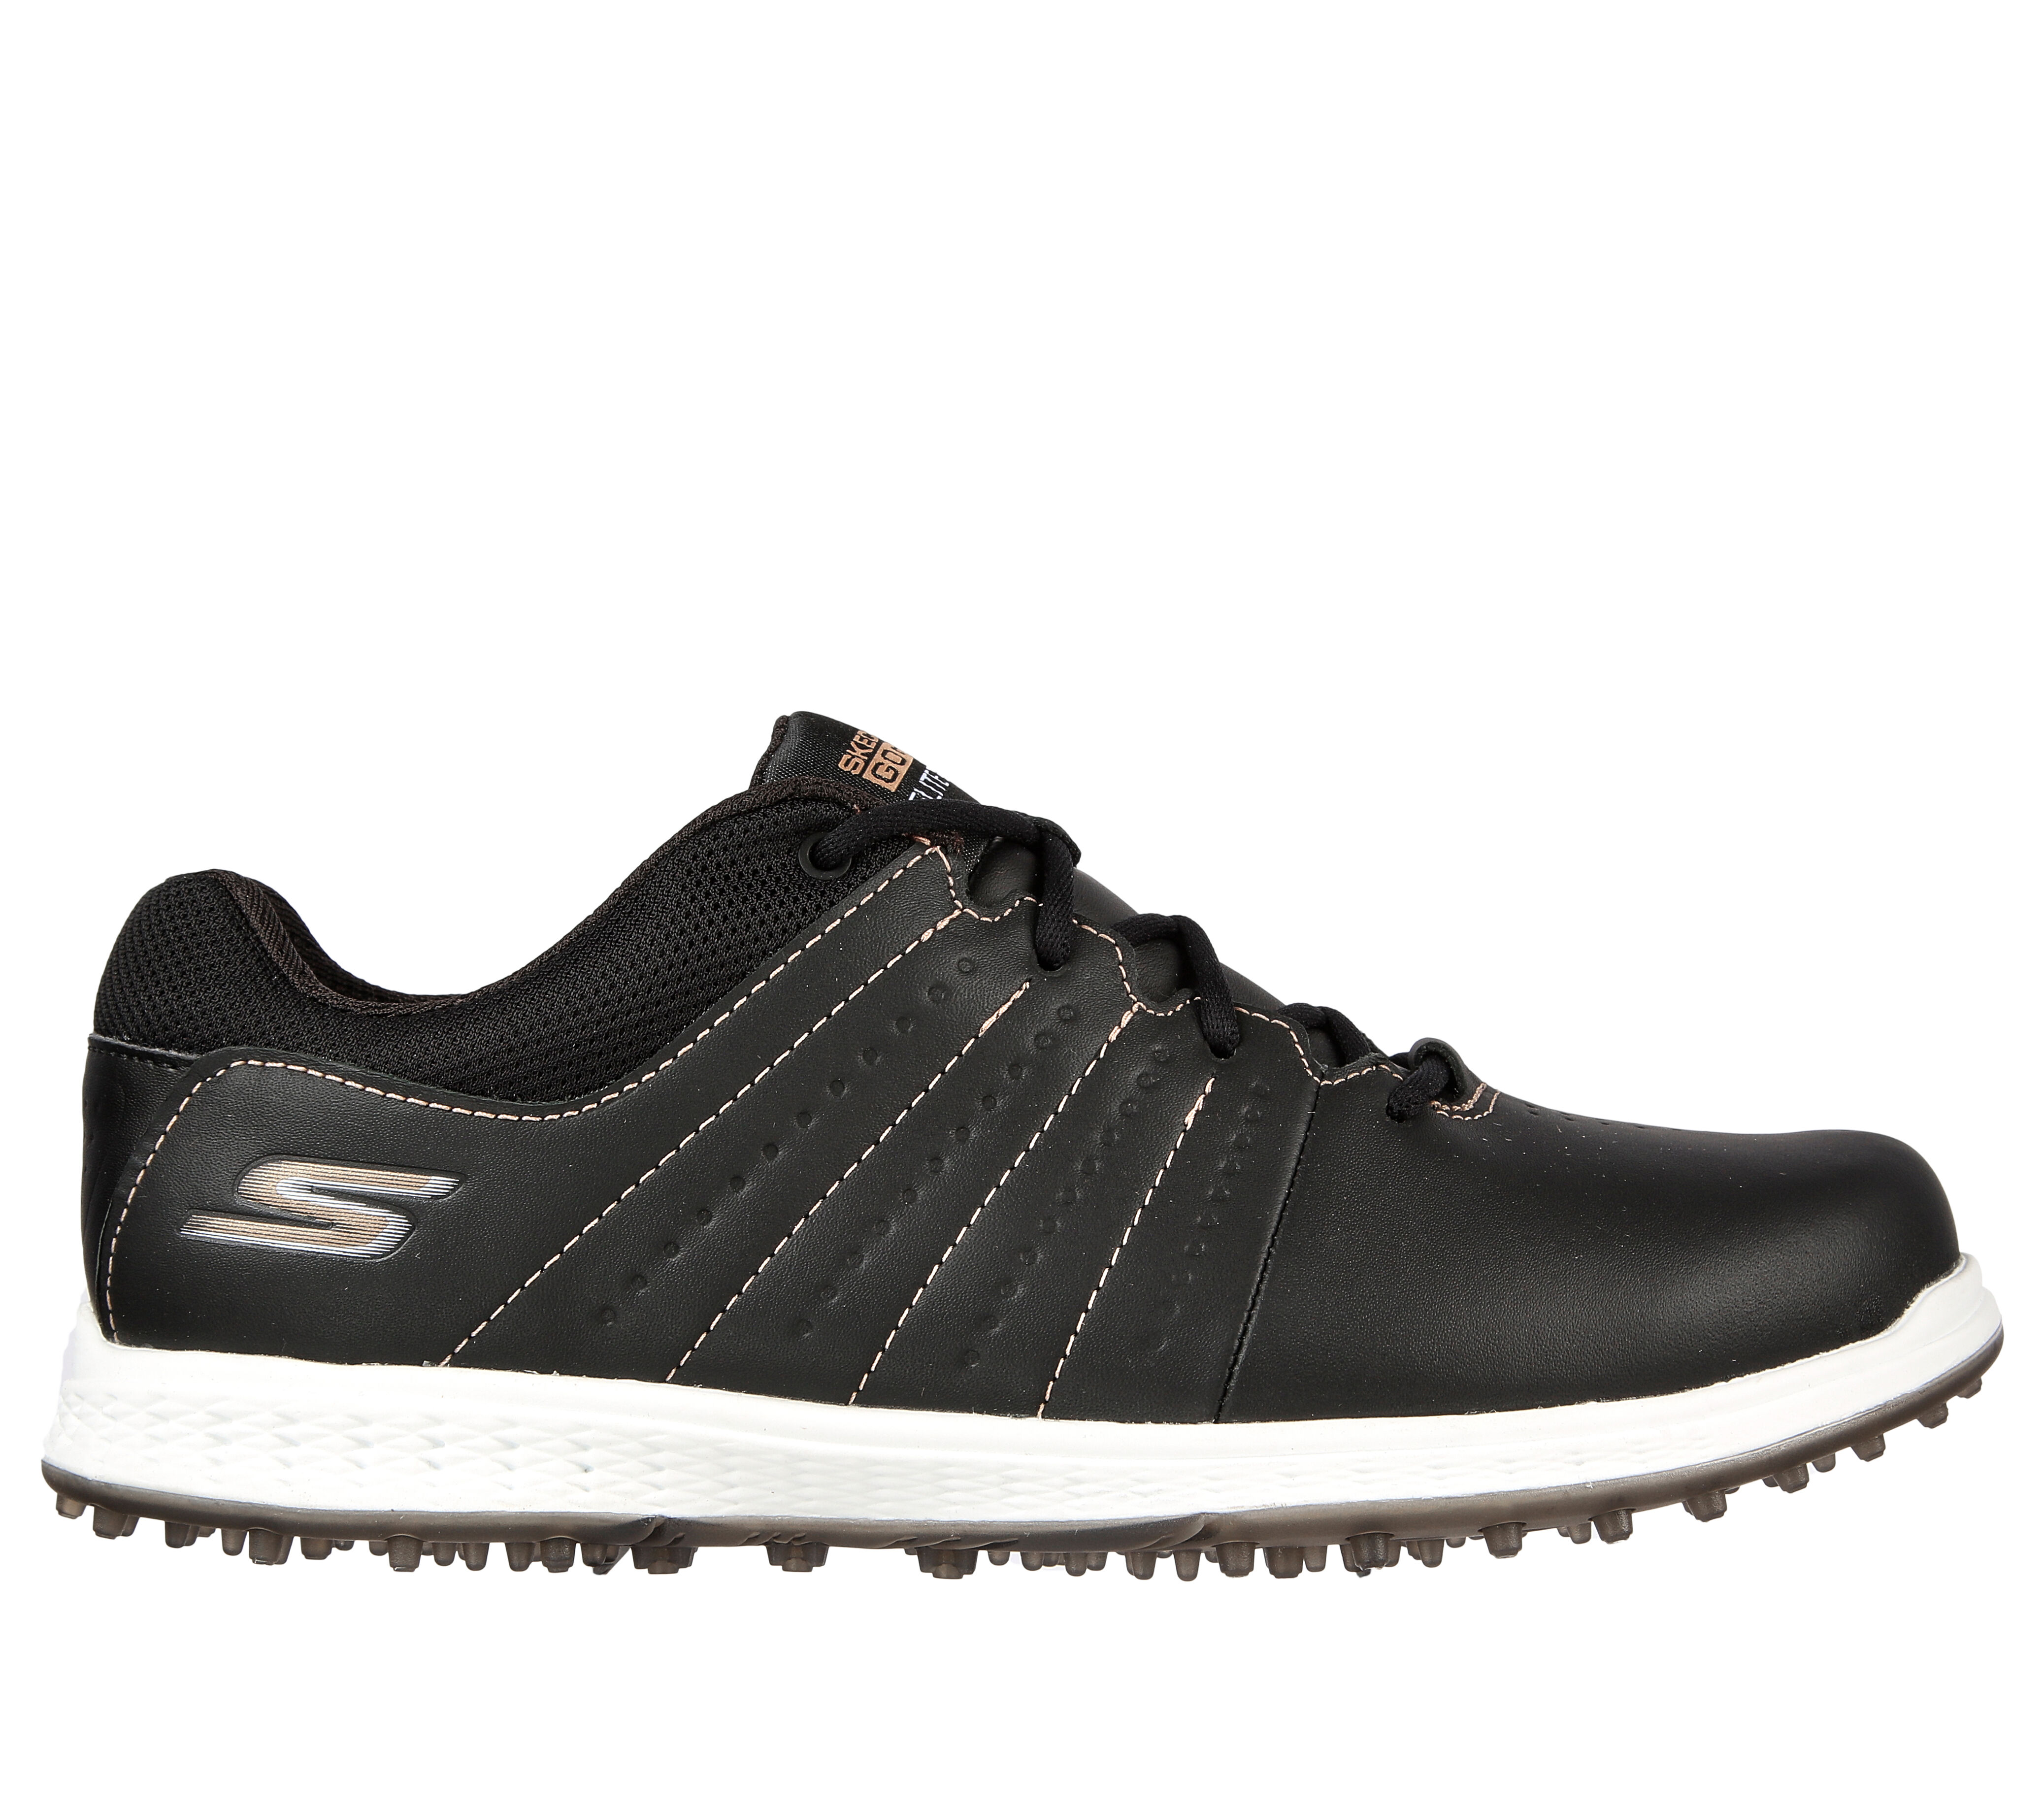 skechers golf shoes womens canada